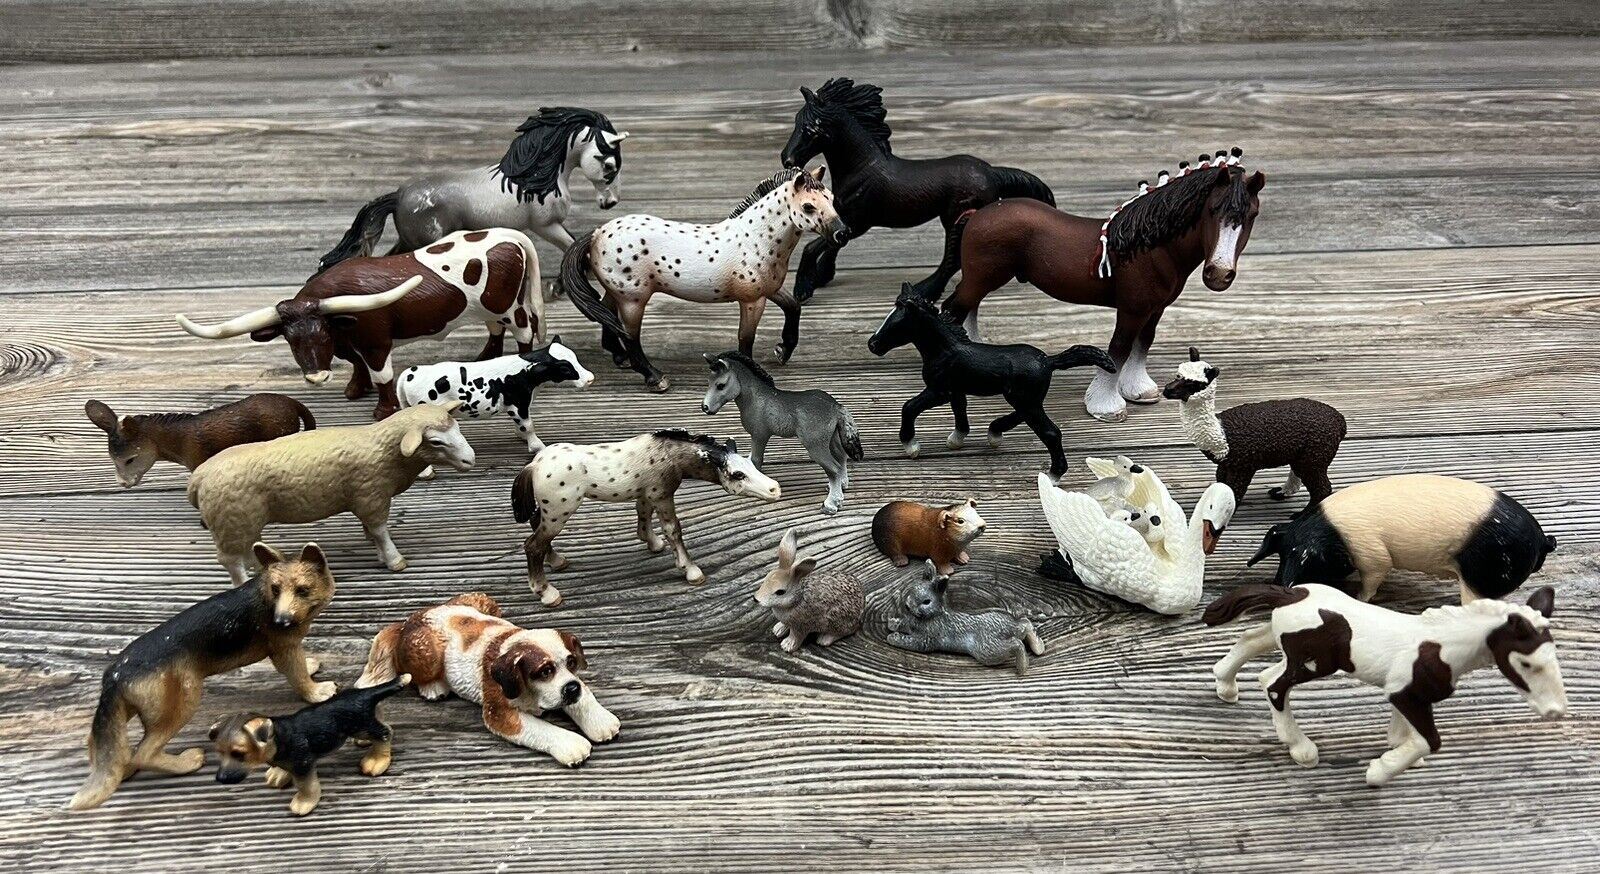 Lot Of 21 SCHLEICH Domestic Farm Animals Collectible Figurine Toys Horses, Cow+